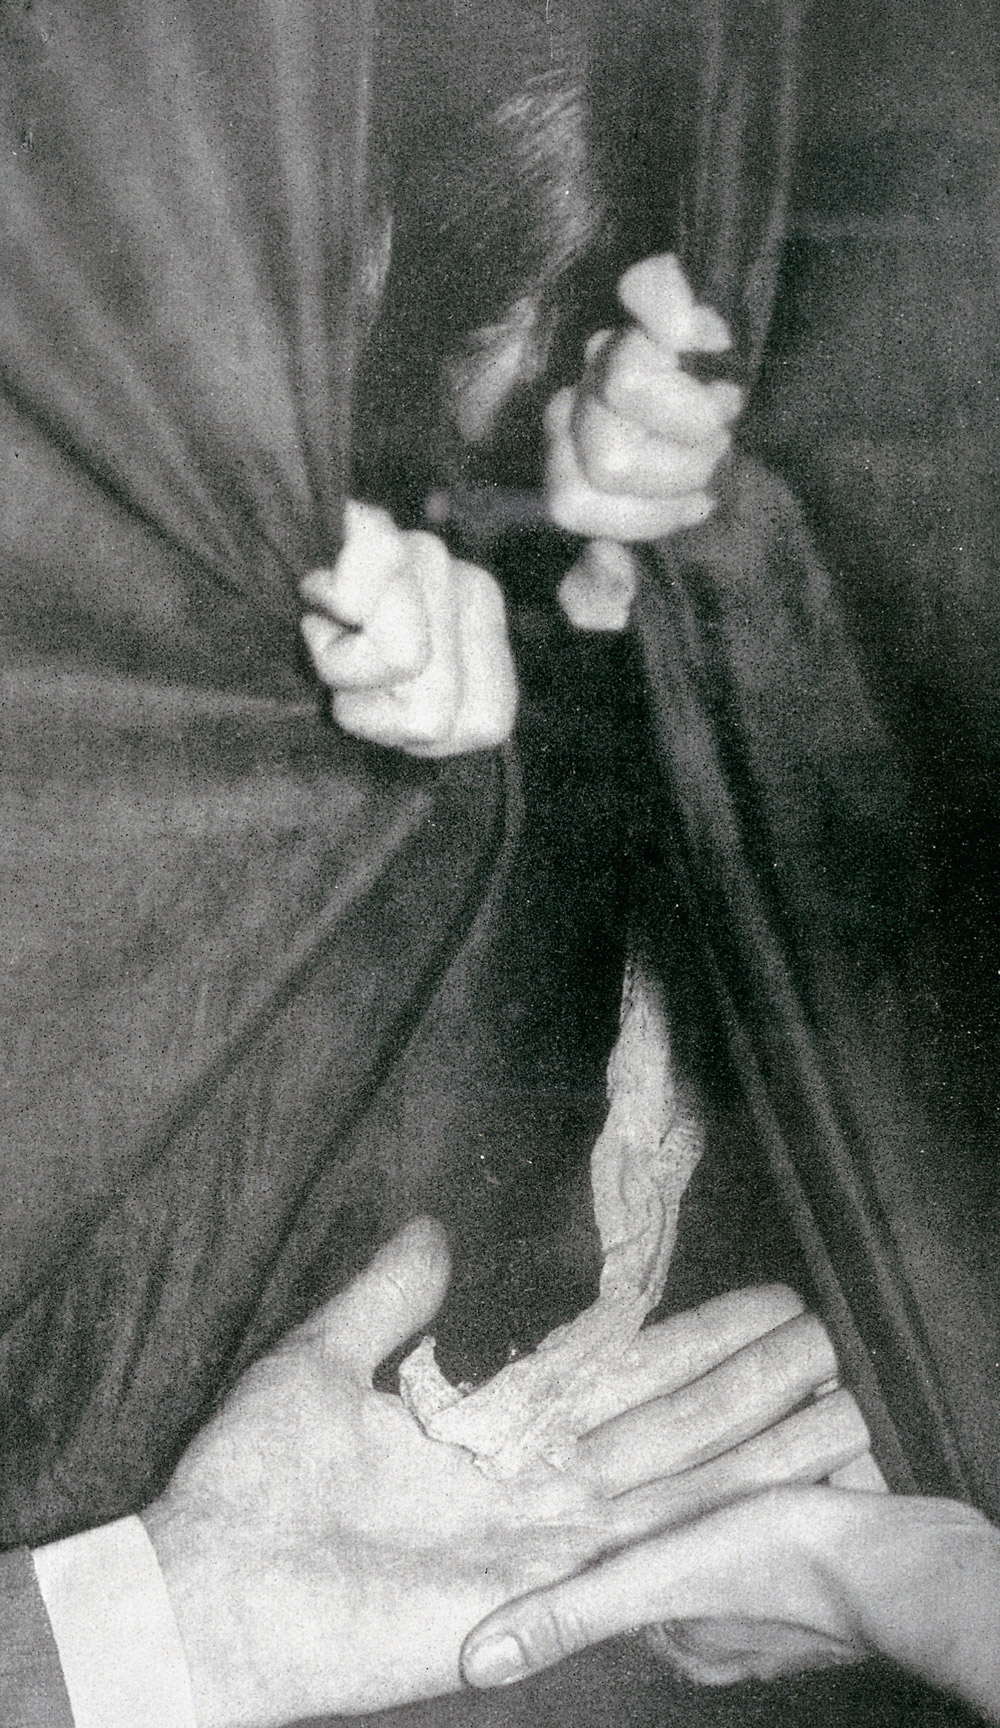 A photograph of Eva C. hidden behind a curtain during the séance of 21 August 1911, two hands reaching out to hold the ectoplasm.